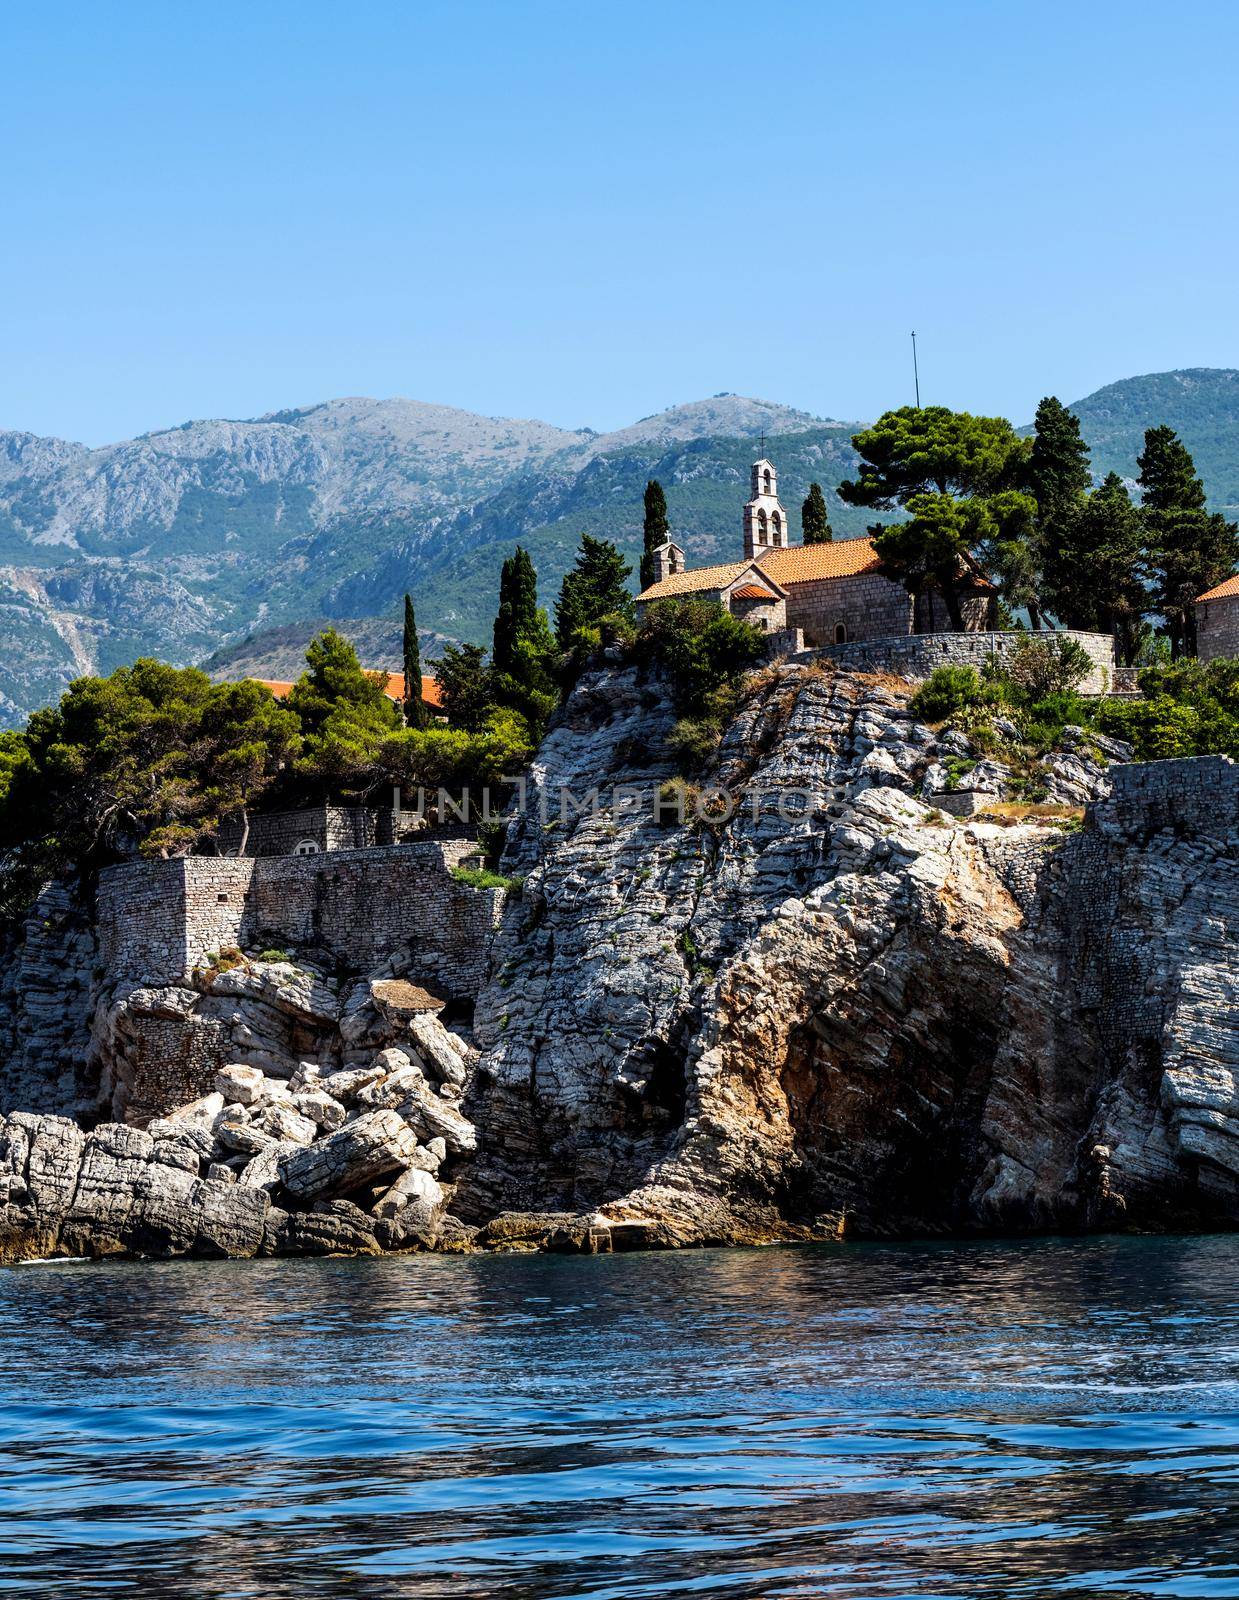 Scenic town on rocks in Montenegro, view from Adriatic sea in summertime. Beautiful Mediterranean architecture with mountains in sunny day